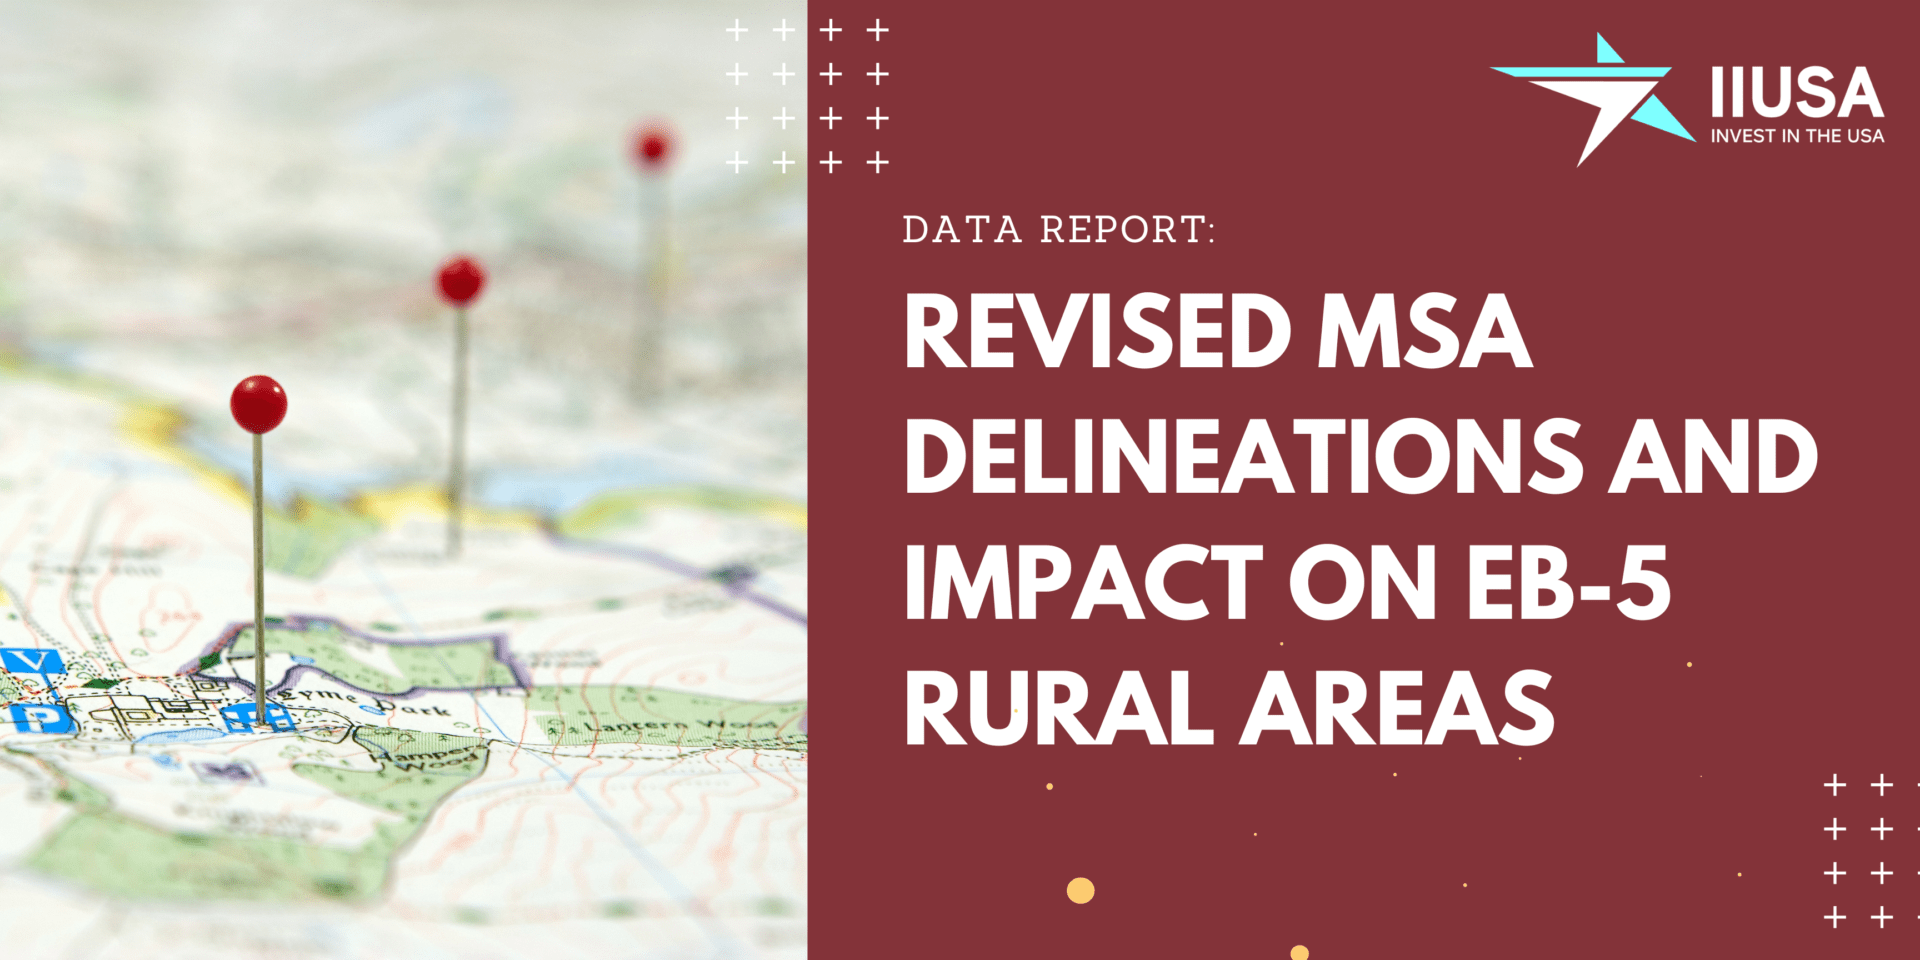 IIUSA Data Analysis: Revised MSA Delineations and Impact on EB-5 Rural Areas